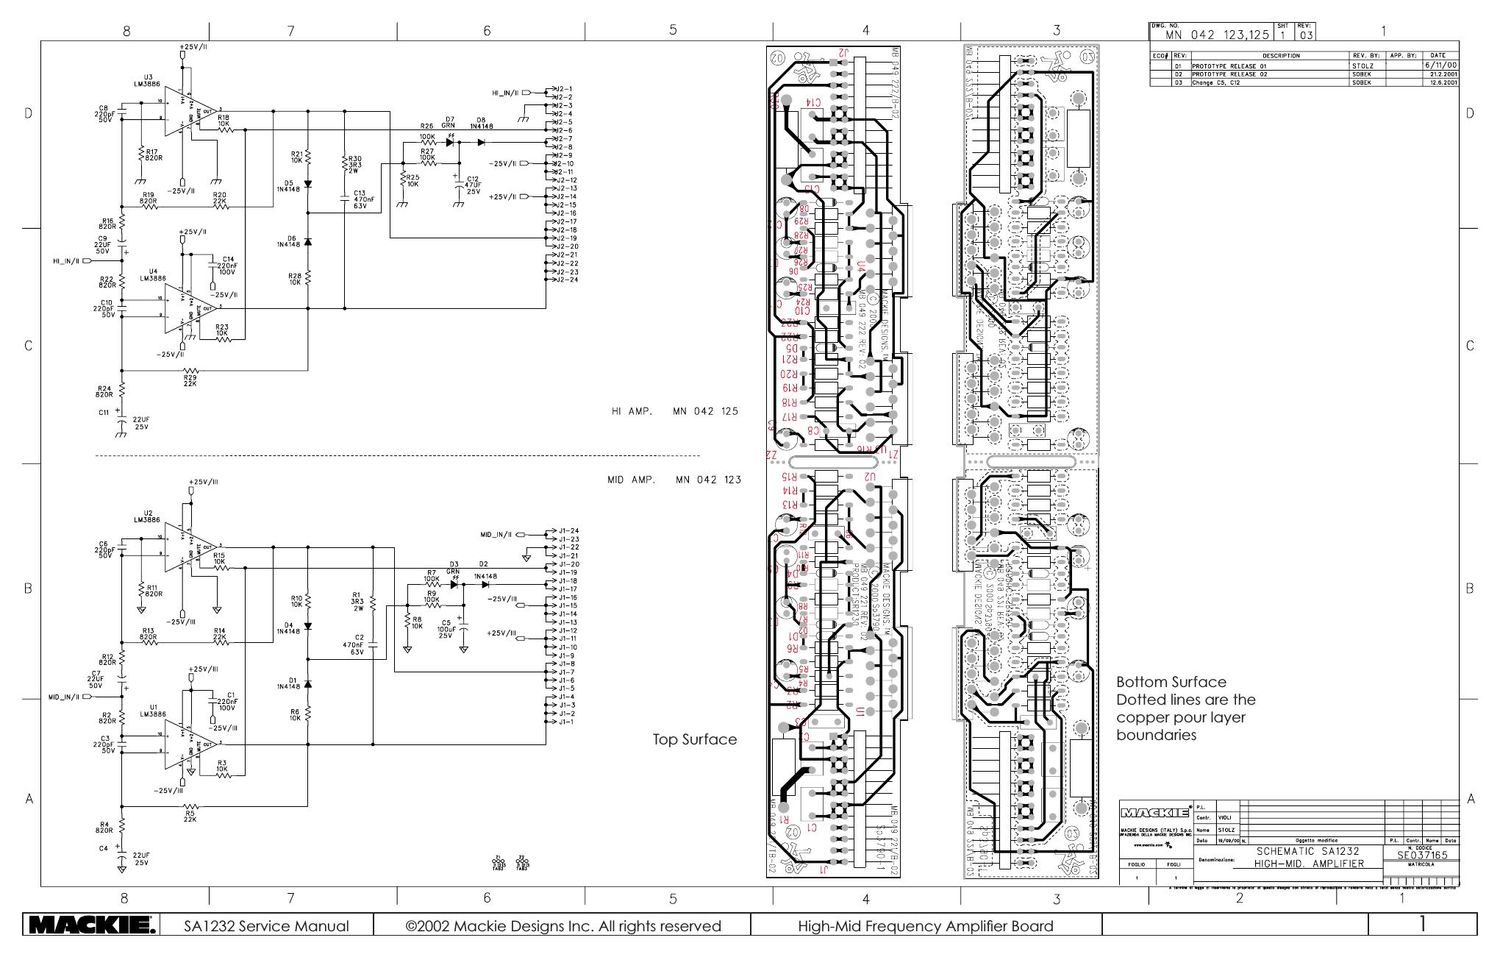 Mackie SA1232 High Frequency Power Amp Schematic